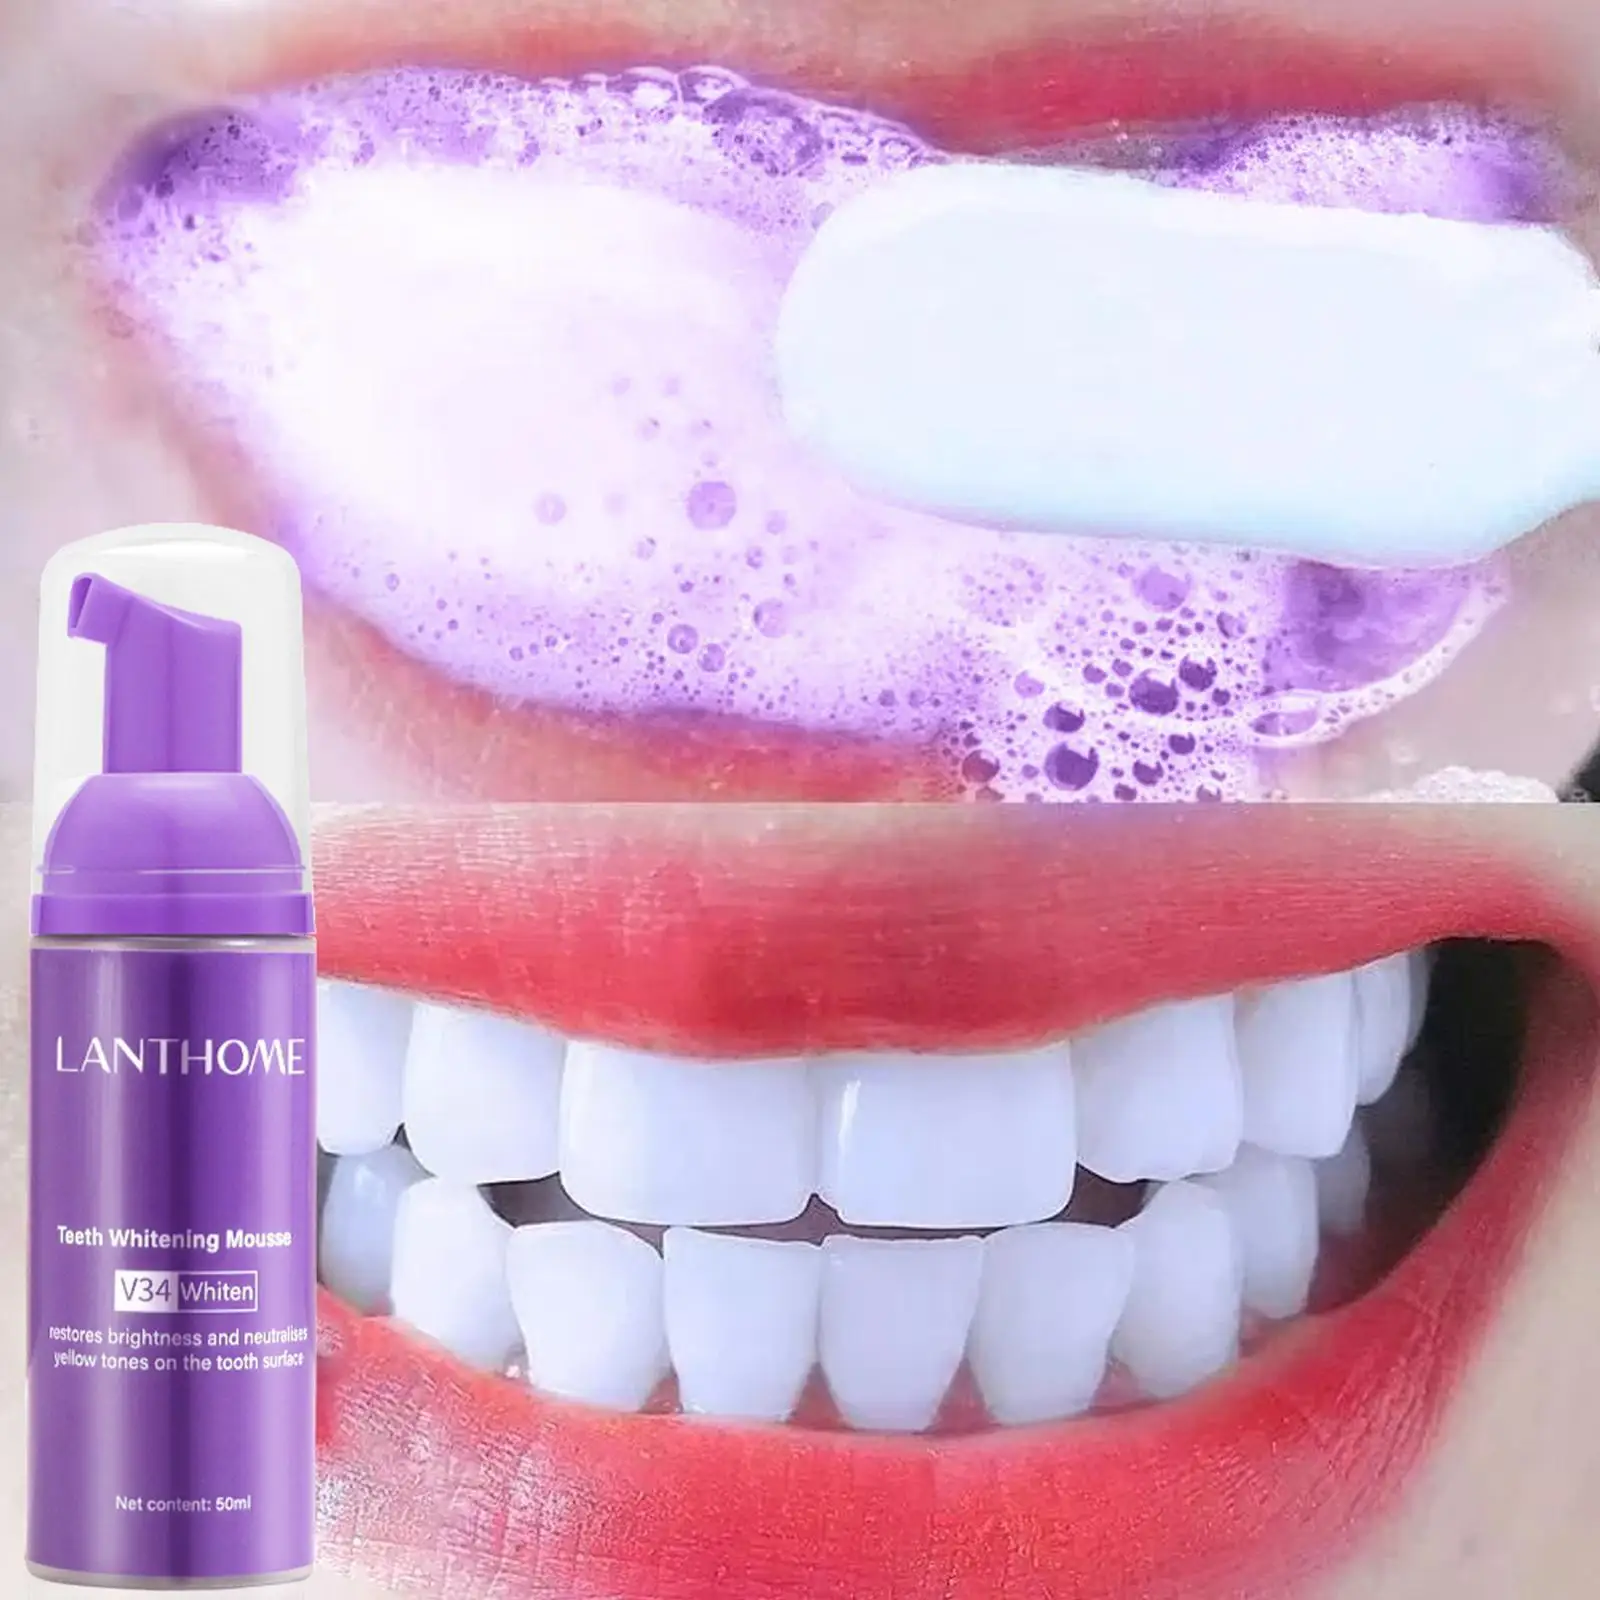 

50ml V34 Teeth Whitening Mousse Remove Stains Fresh Whitening Tooth Mousse Hygiene Toothpaste Foam Cleaning Oral Breath Tee W1C0